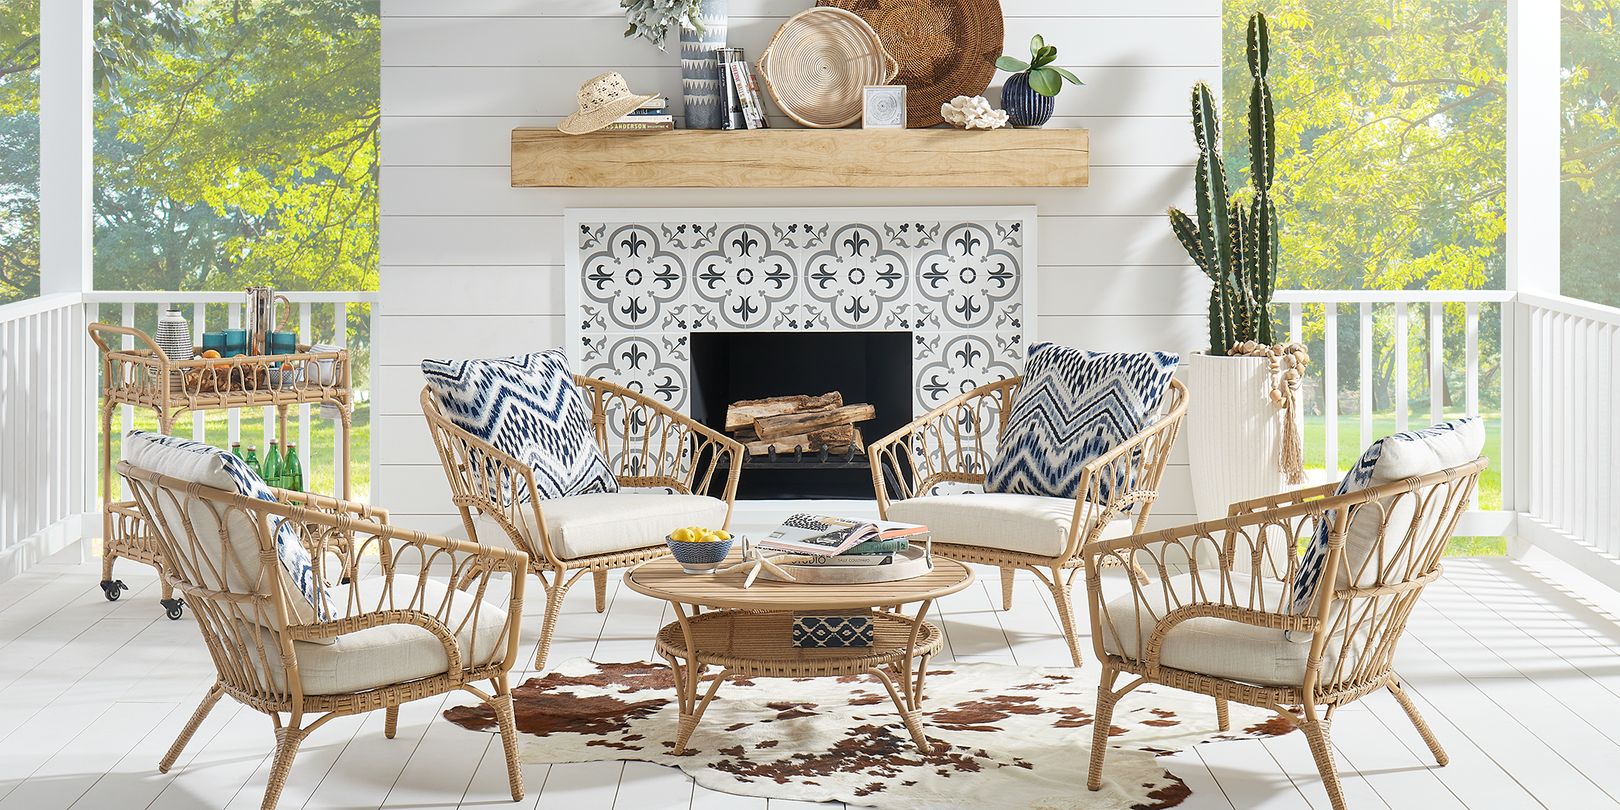 photo of rattan seating set on a porch